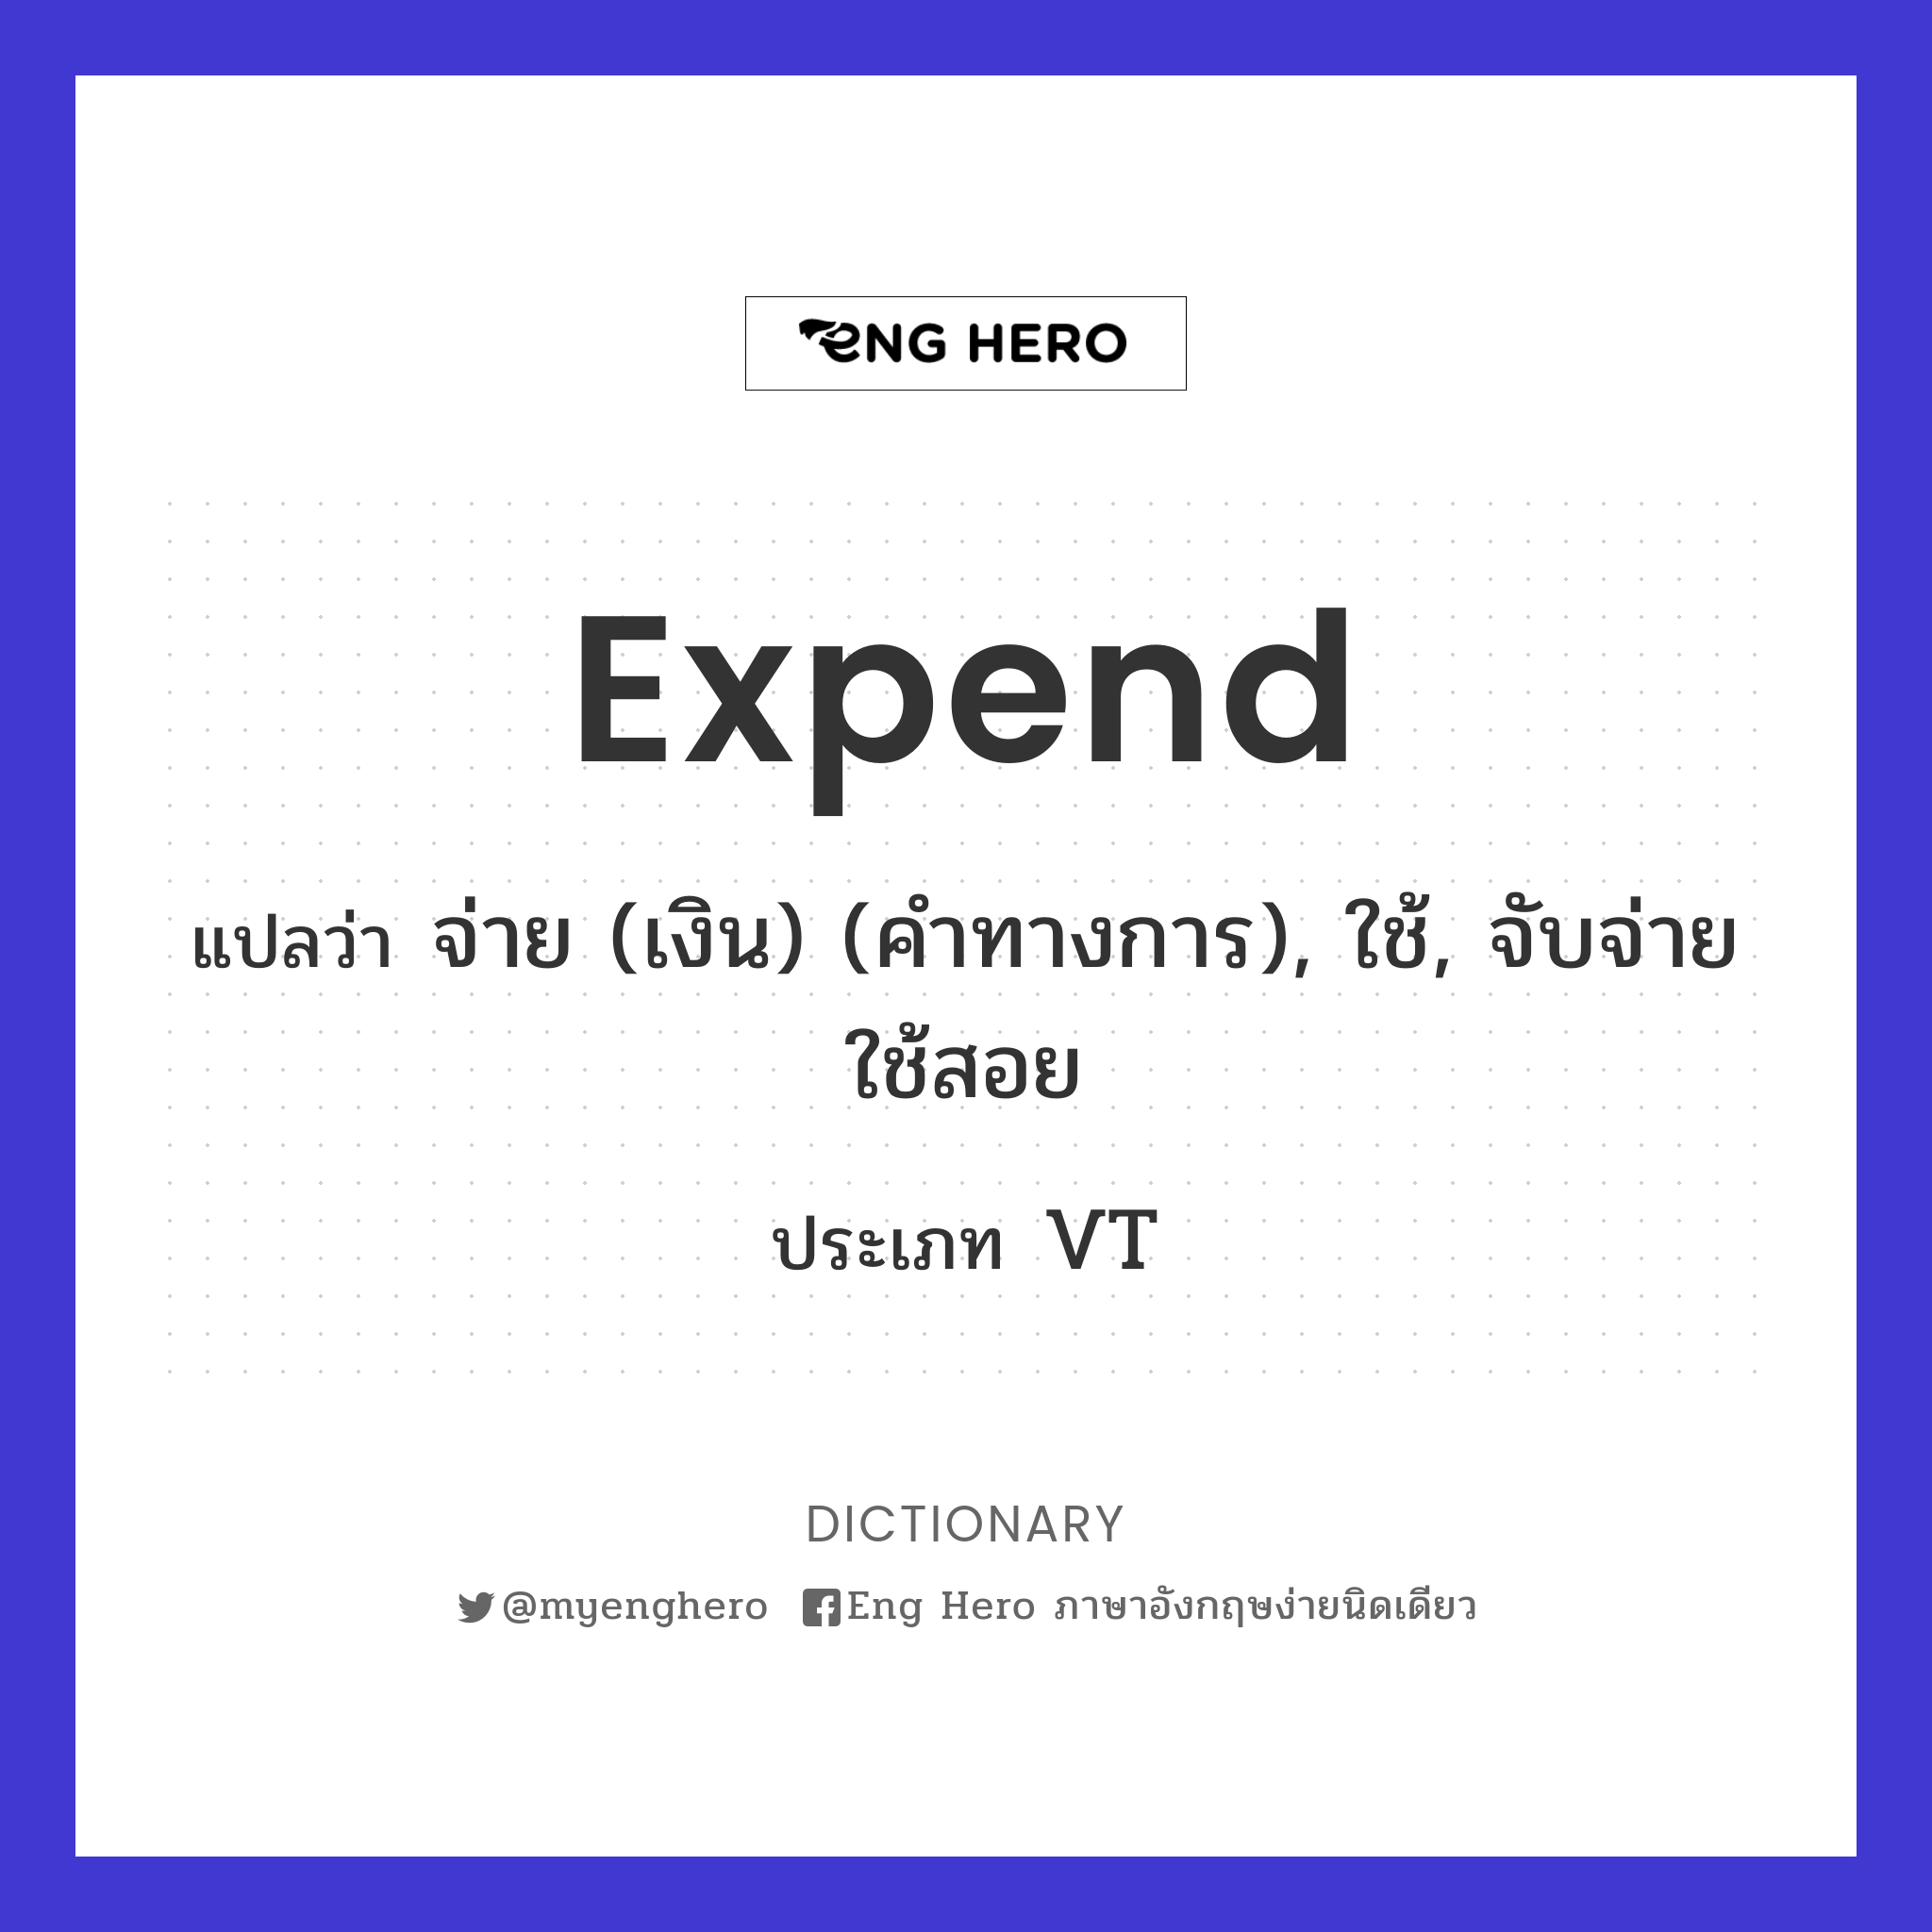 expend